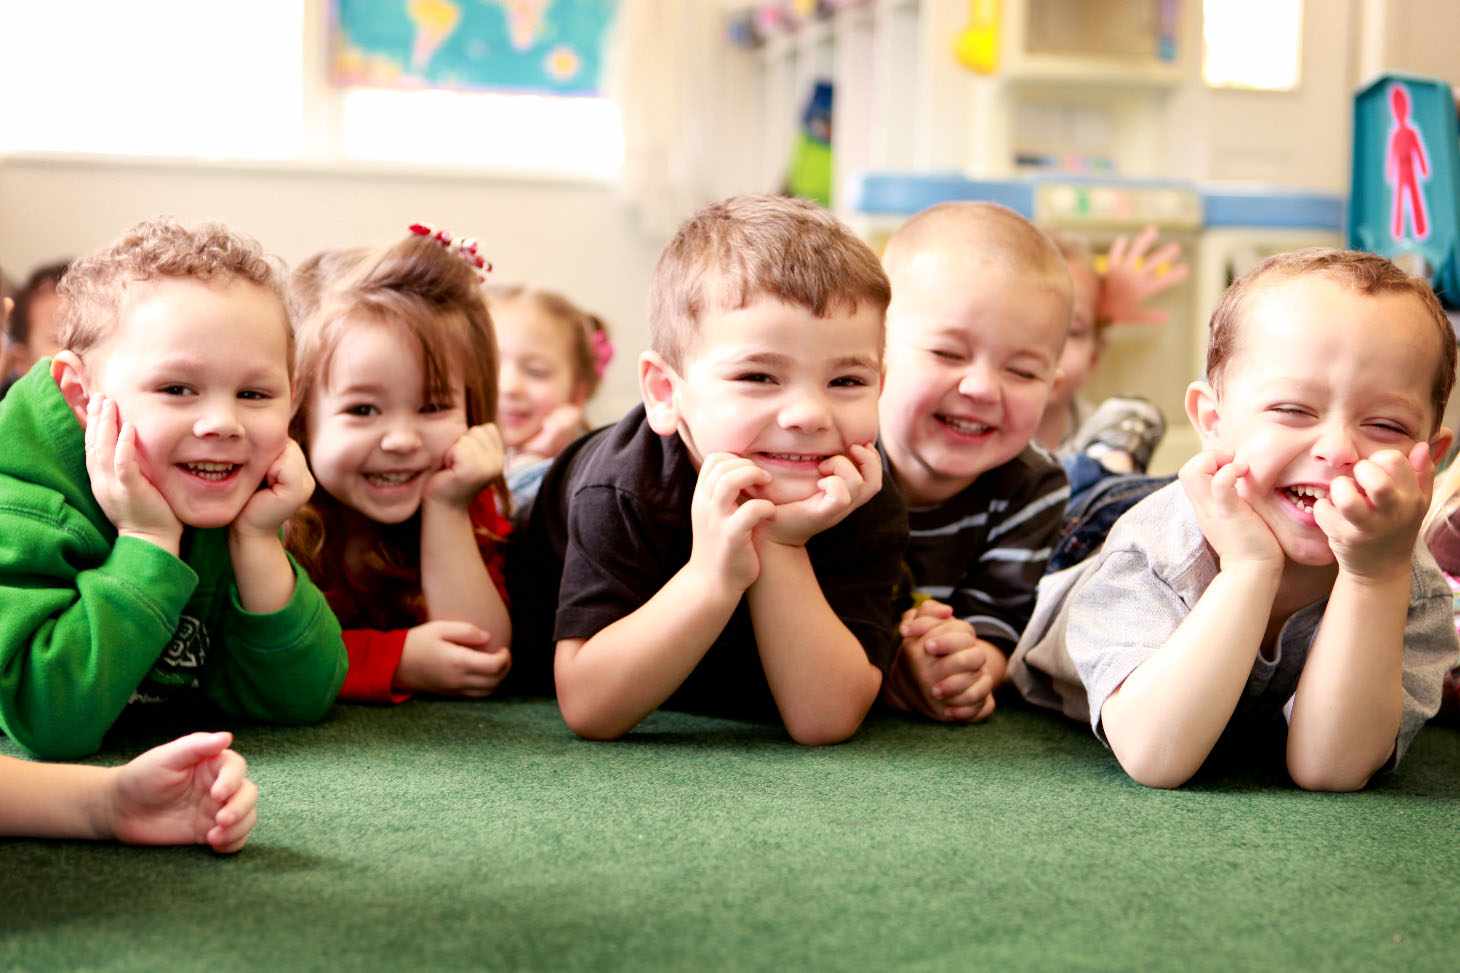 Why Choose a Preschool for Your Child?